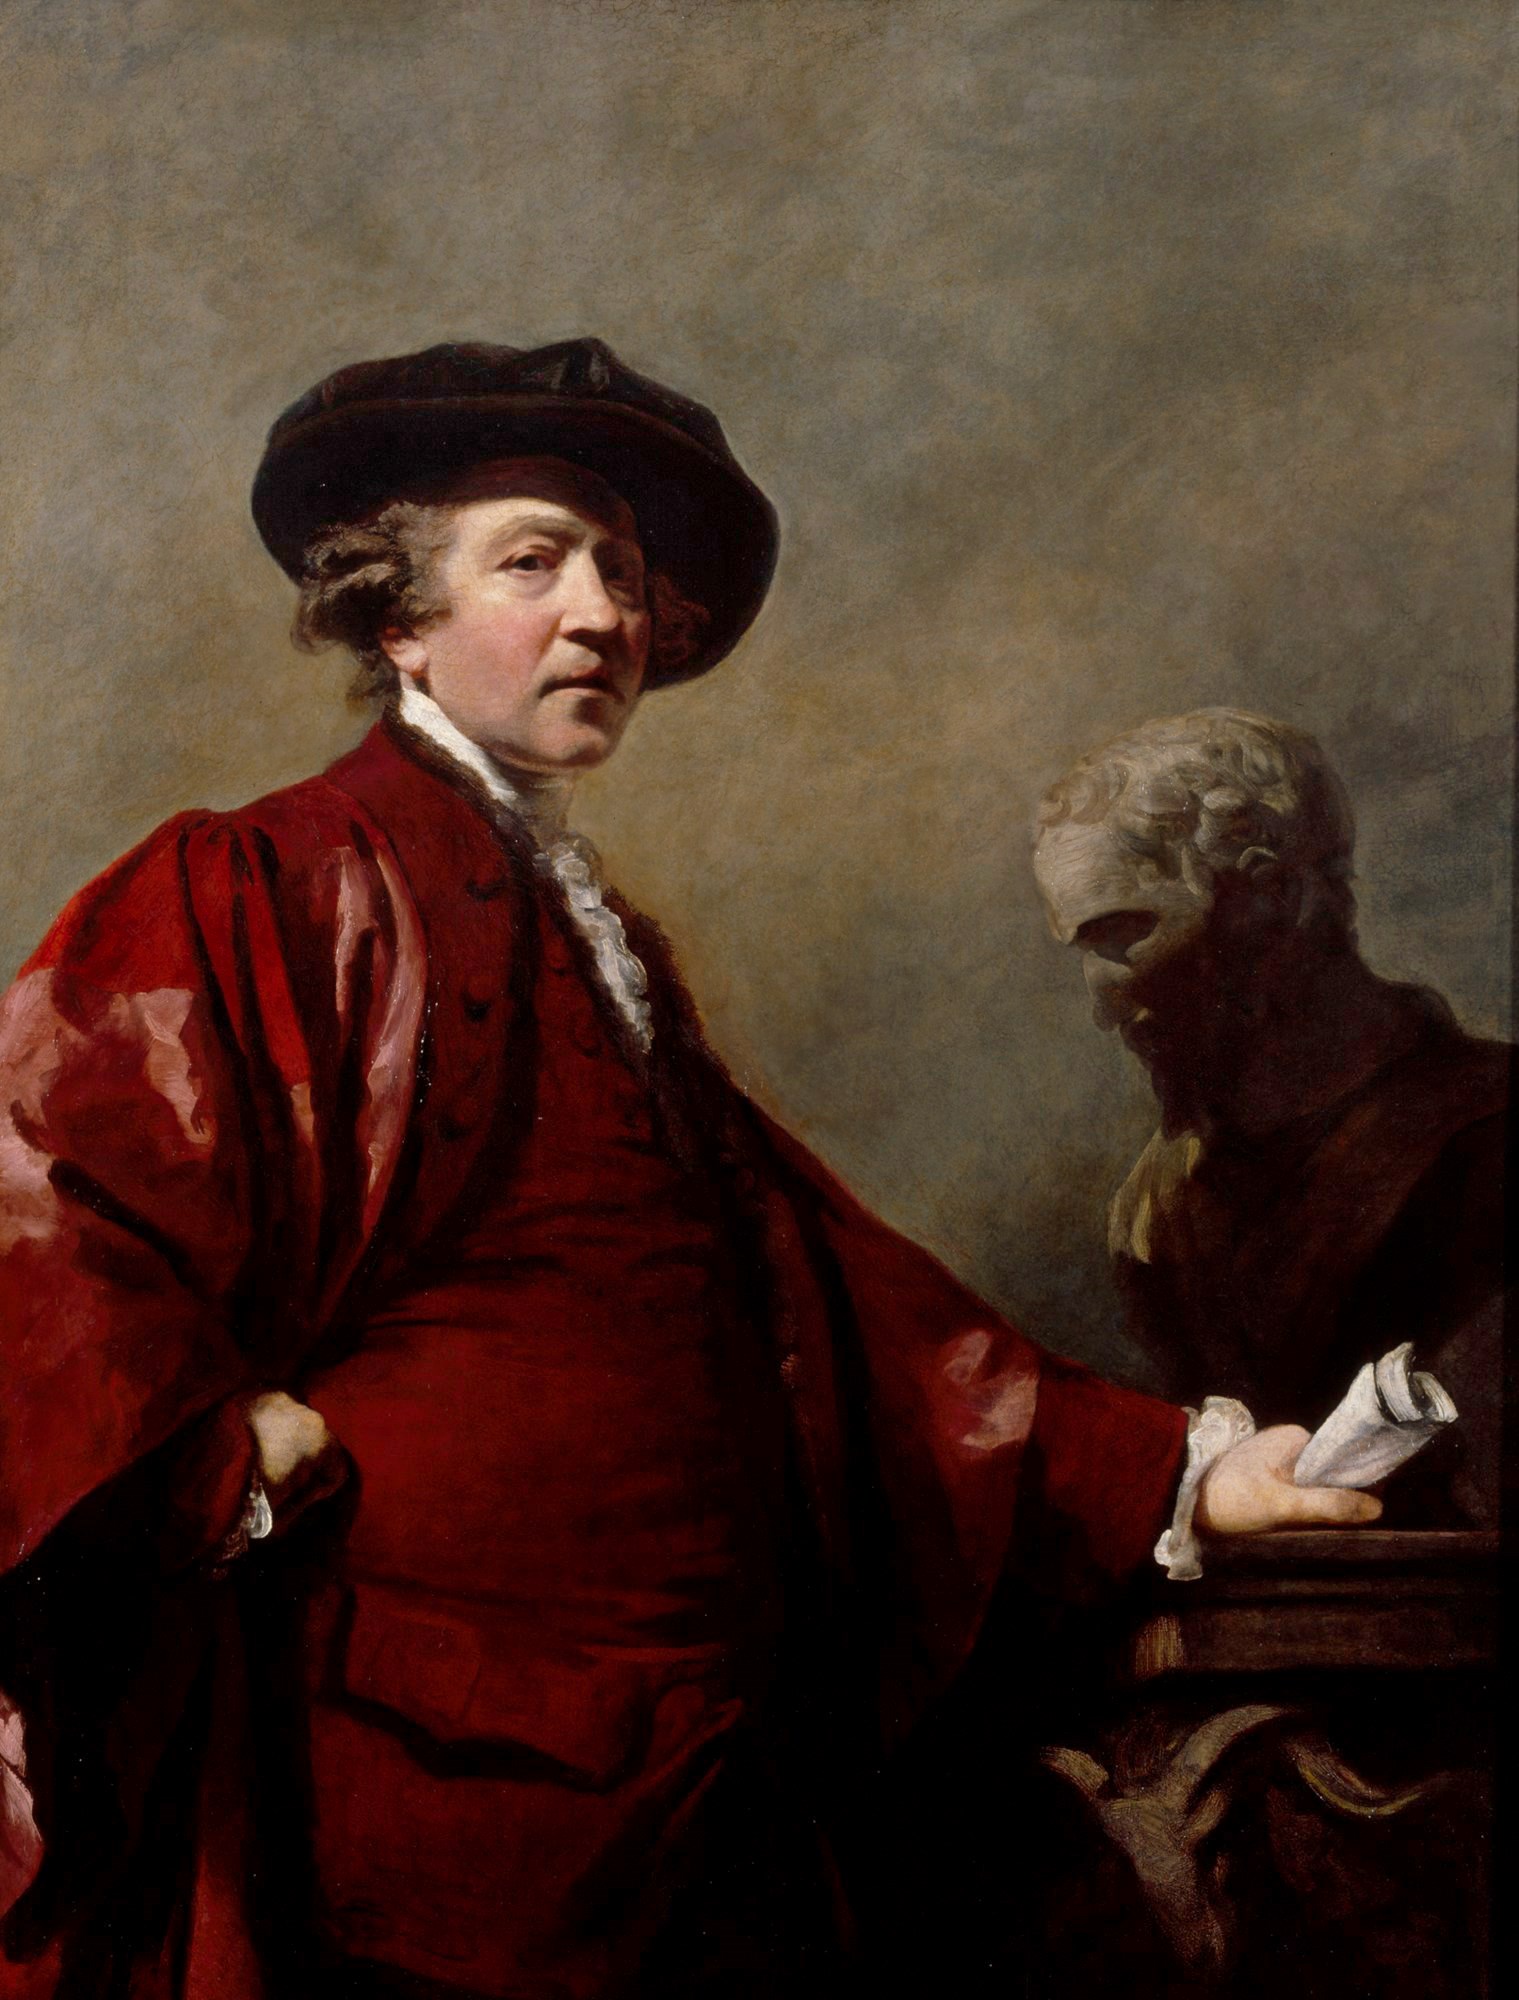 Sir Joshua Reynolds paid homage to his heroes, Rembrandt van Rijn and Michelangelo, in this self-portrait painted at the peak of his career around 1780. (Photo credit: Royal Academy of Arts)